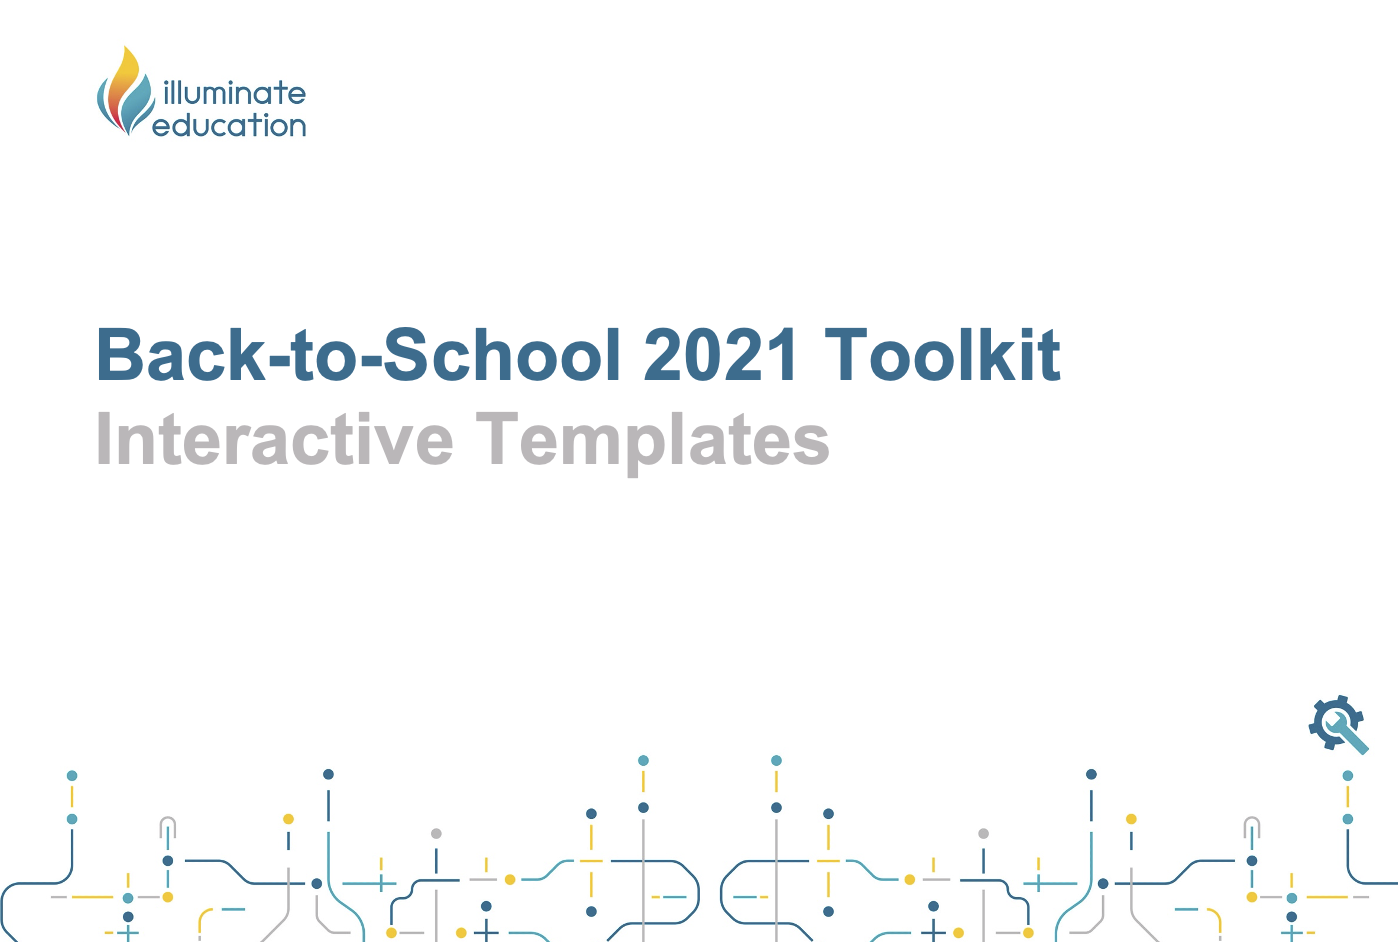 Back-to-School 2021 Toolkit Interactive Templates